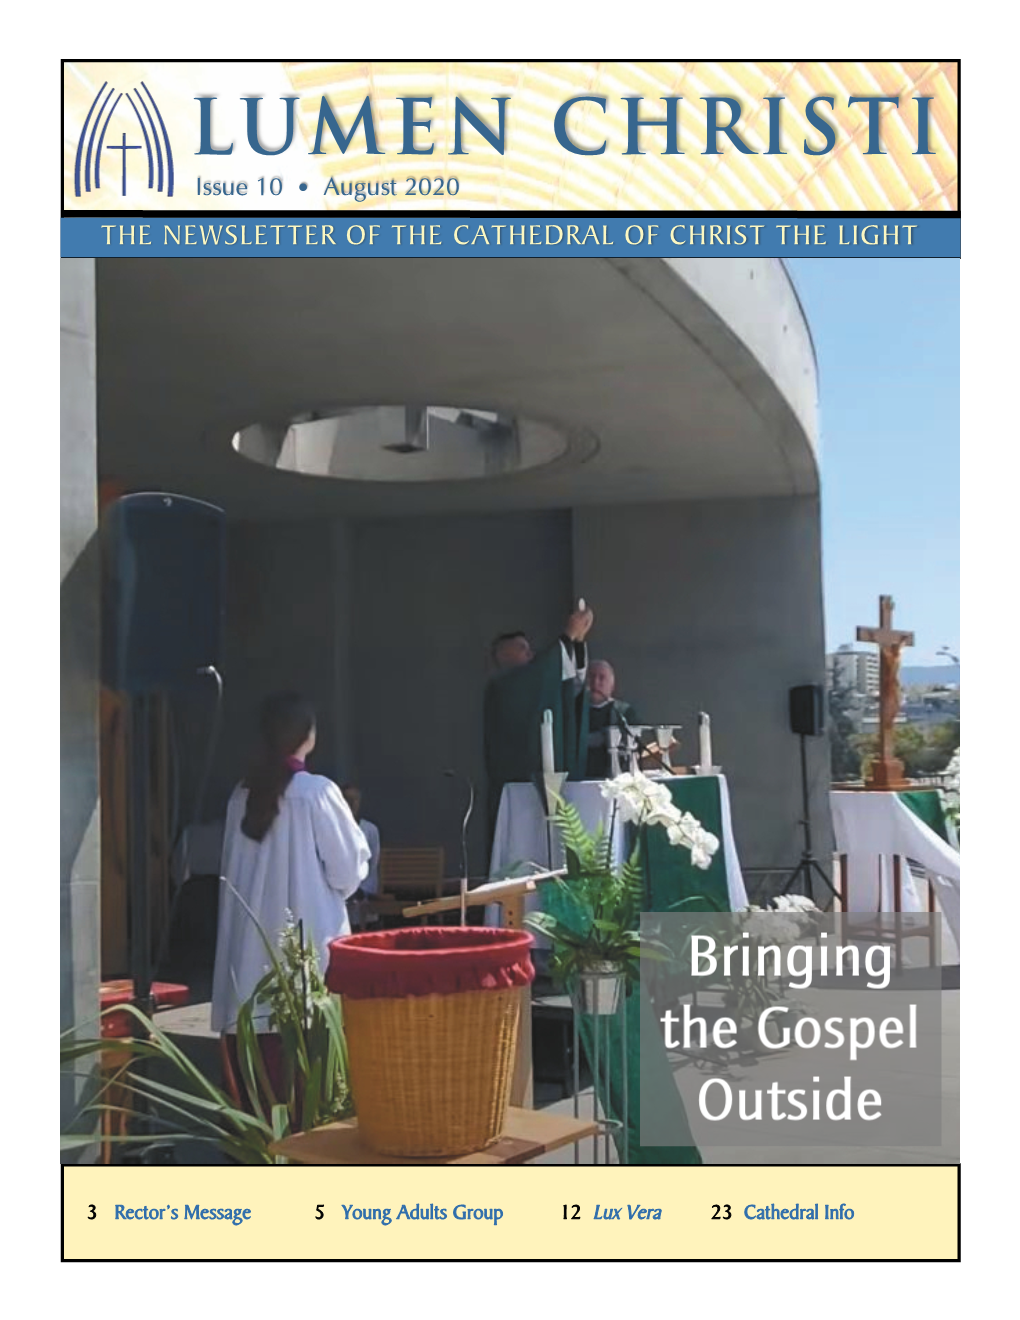 LUMEN CHRISTI Issue 10 • August 2020 the NEWSLETTER of the CATHEDRAL of CHRIST the LIGHT